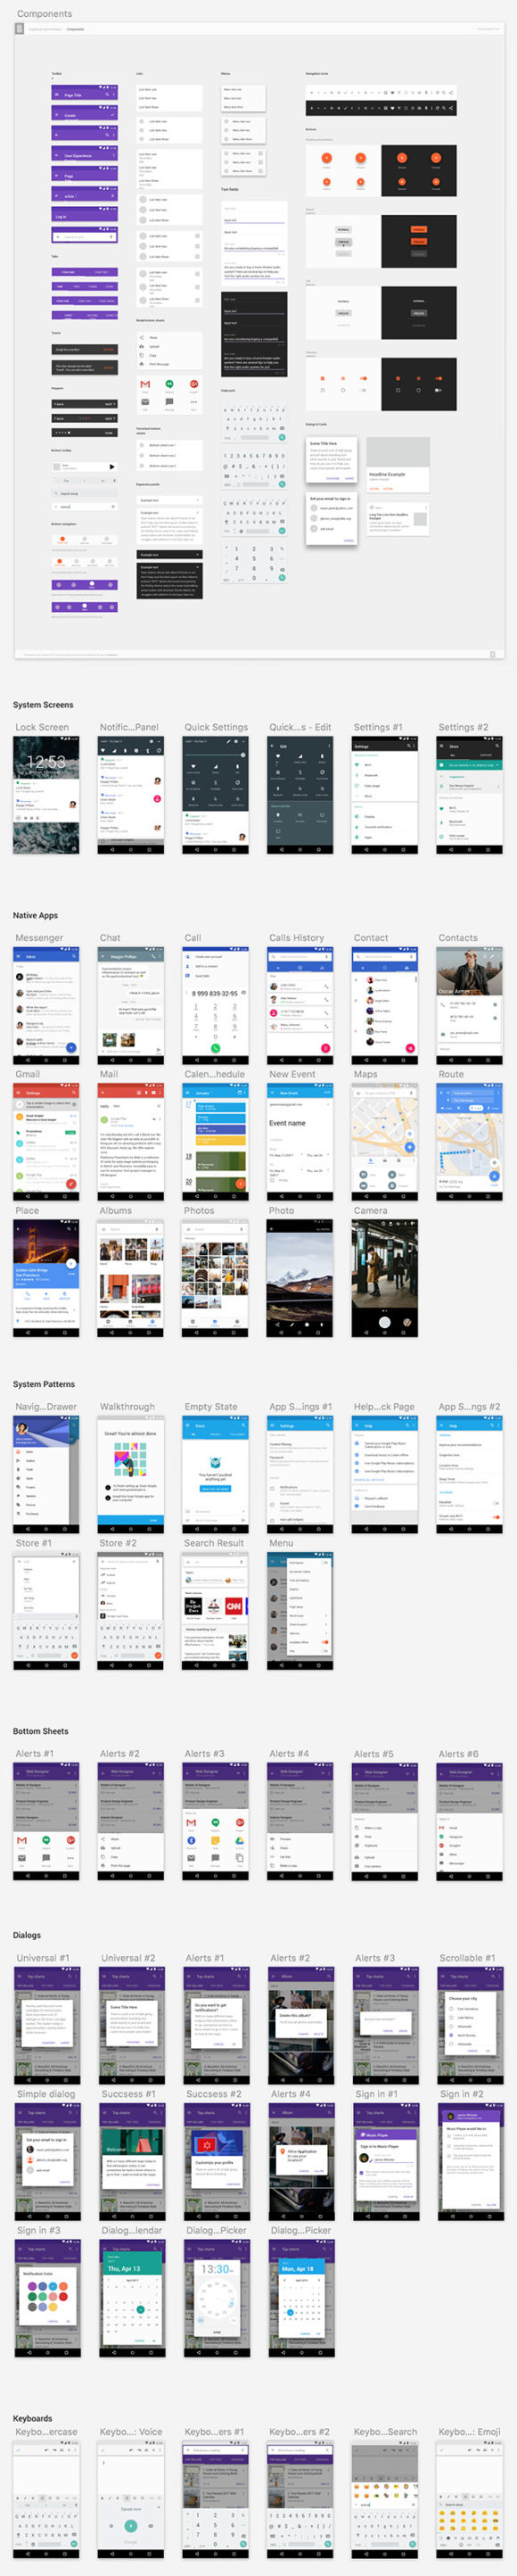 Android Nougat free UI kit - Full preview